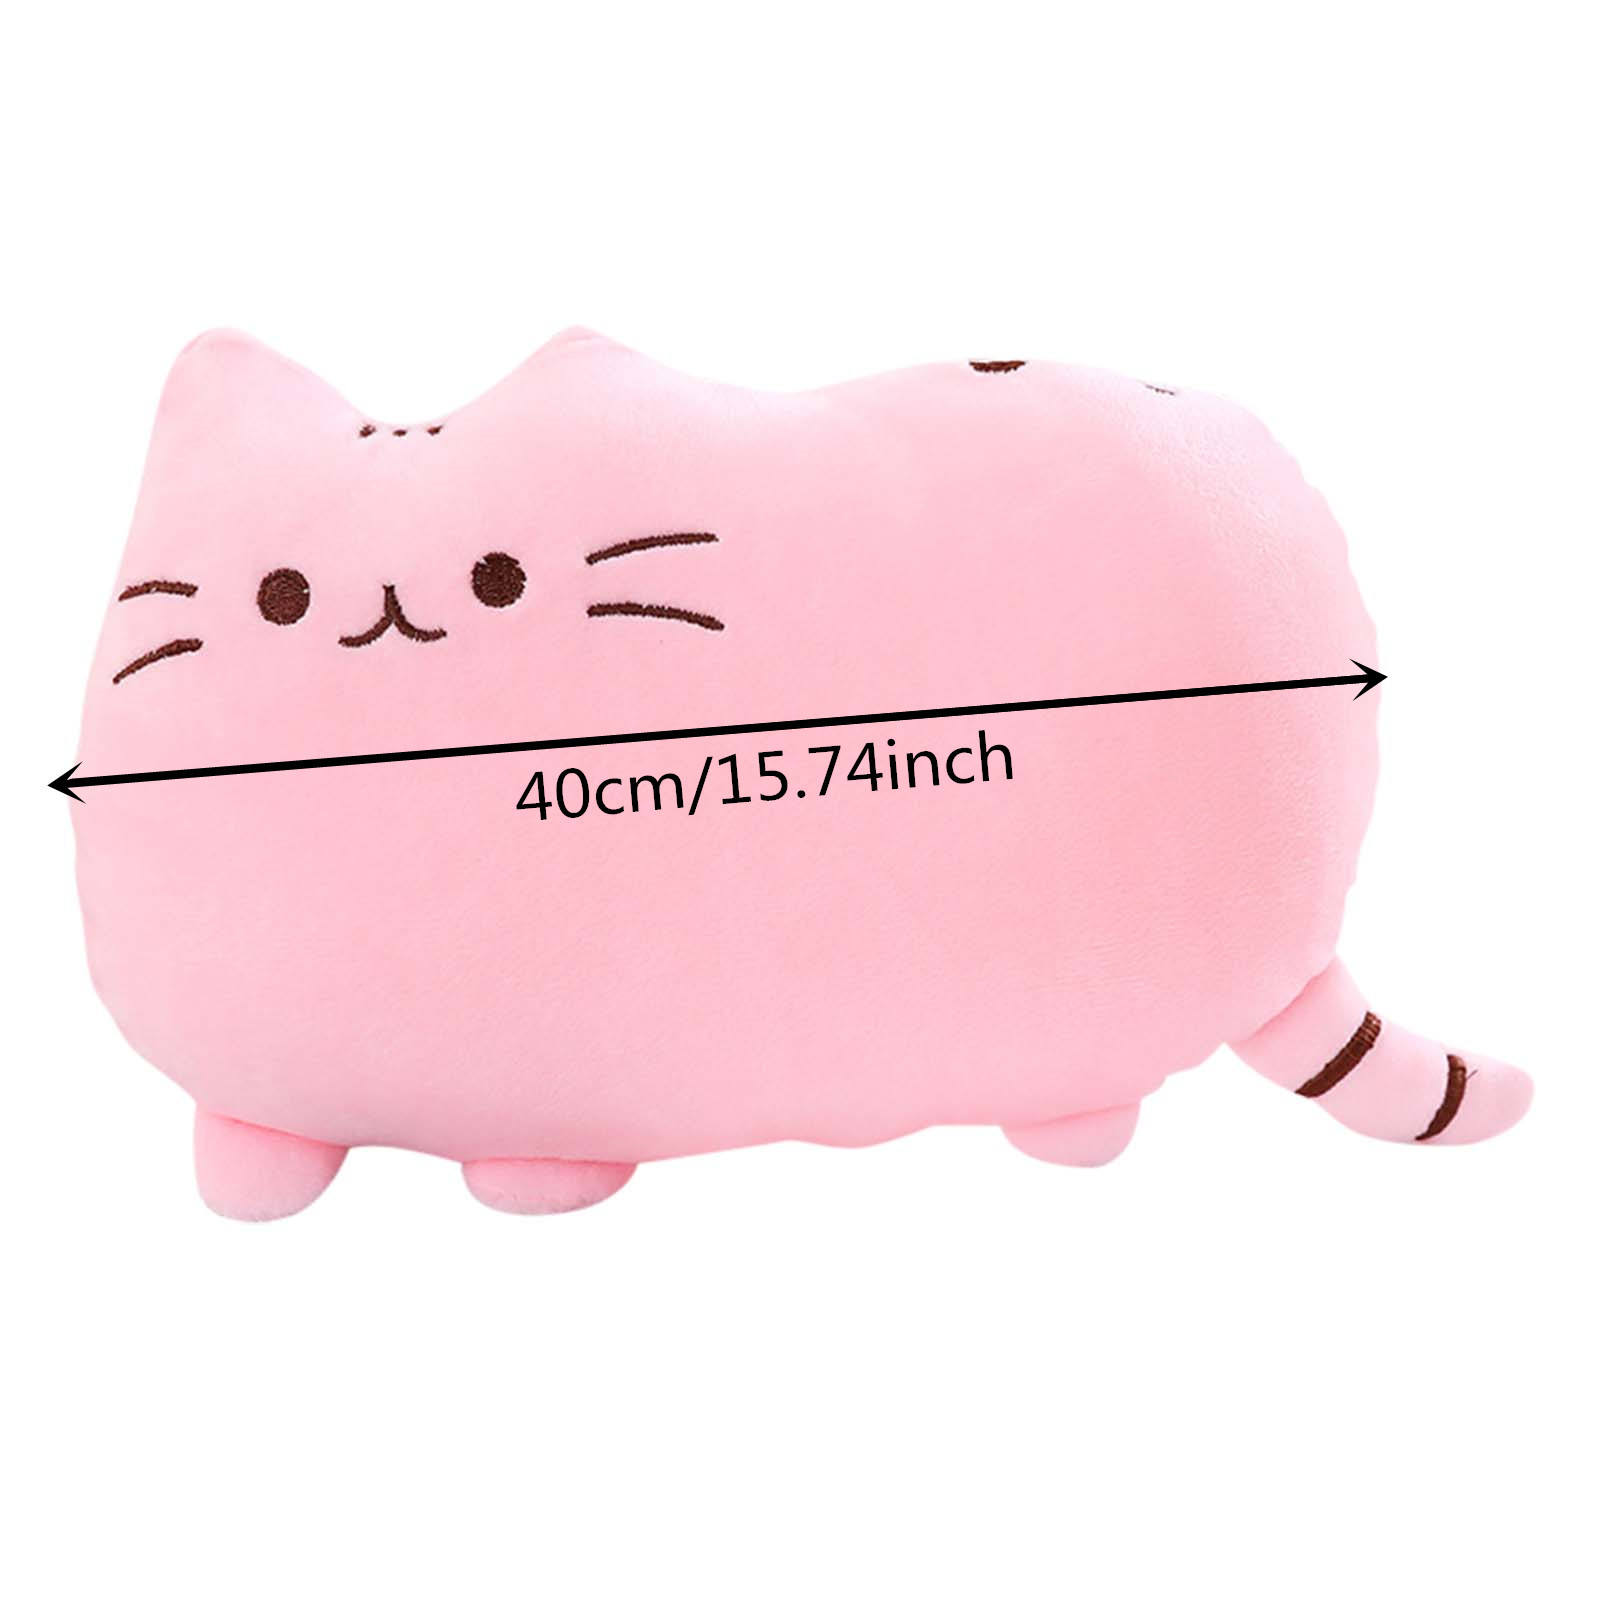 Children Gifts Soft Plush Cute Cat Shape Pillow Cushion Bolster Sofa Toy Home Decor Solid Color Animal Doll Kids toys